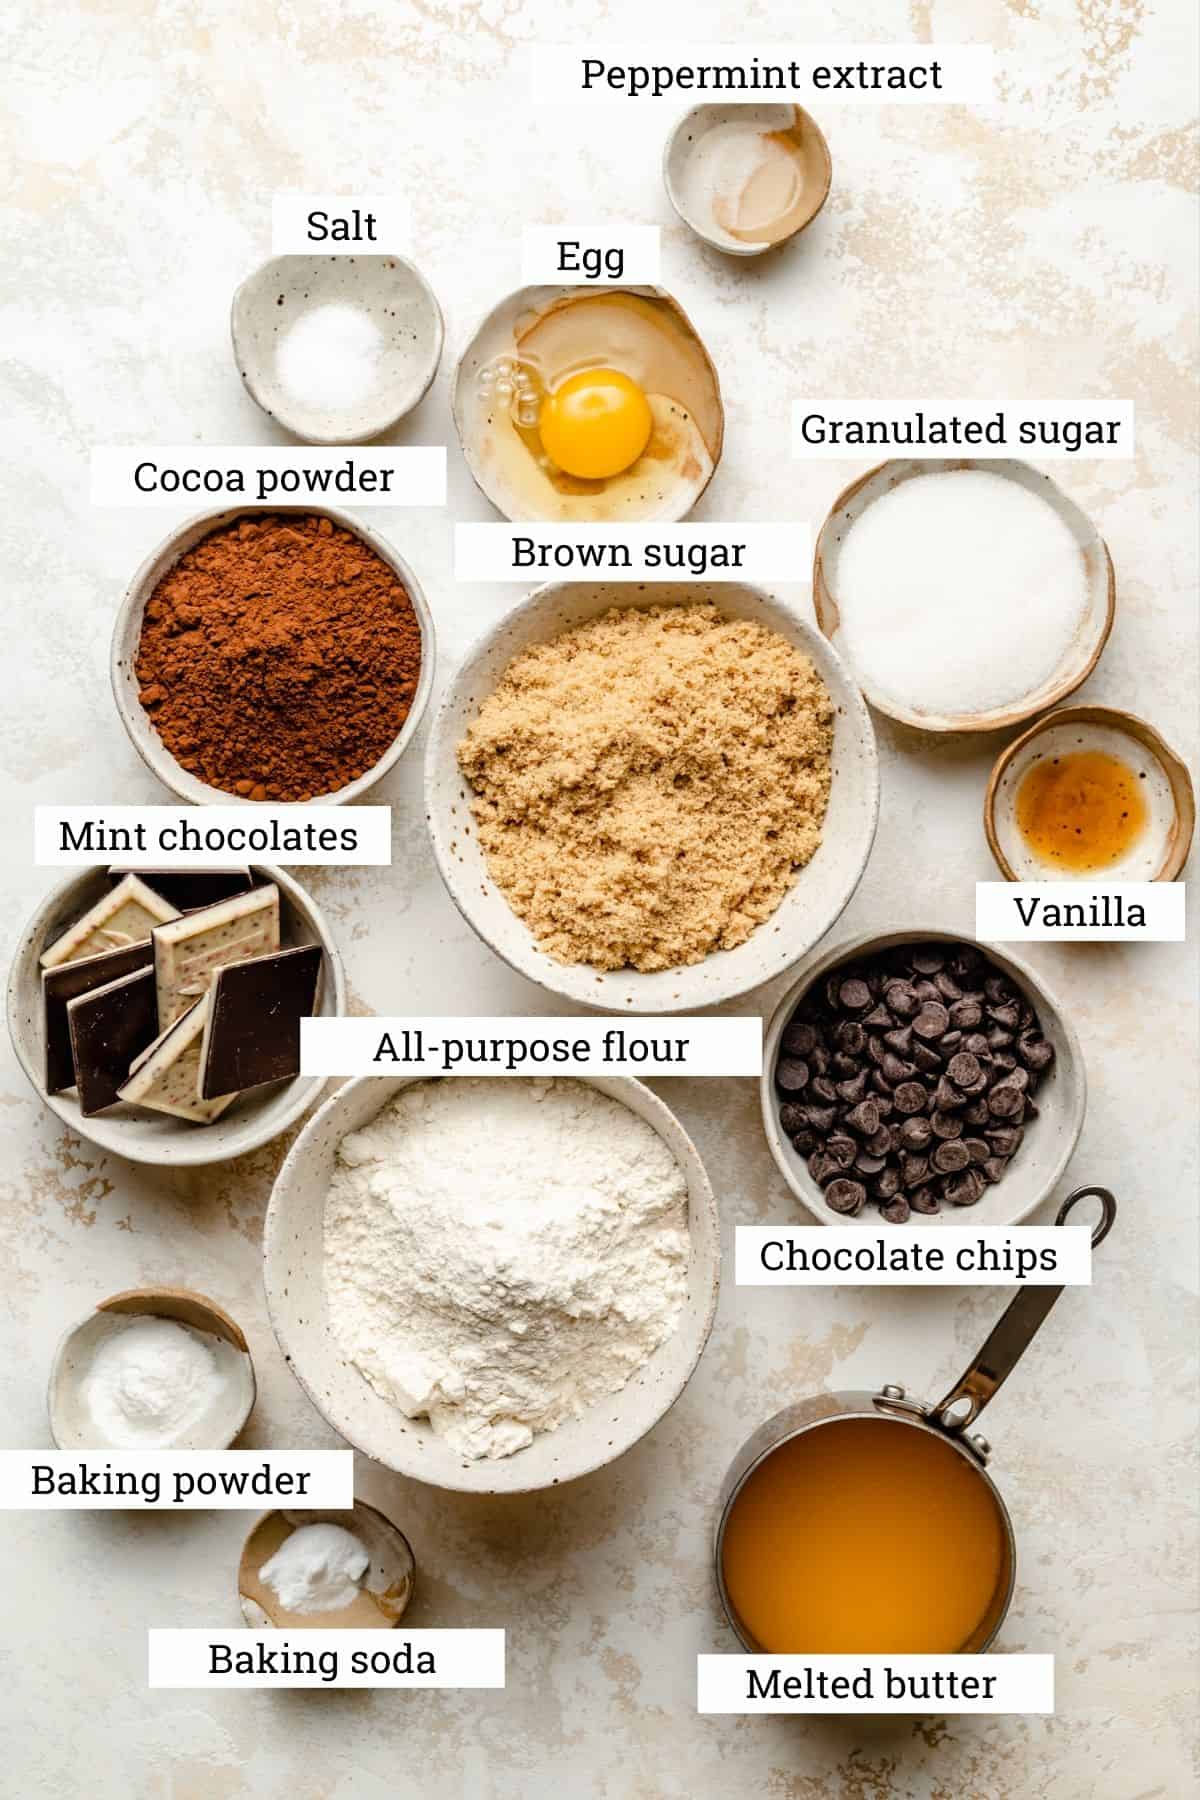 Ingredients in various bowls for the chocolate chip mint cookies including peppermint bark.